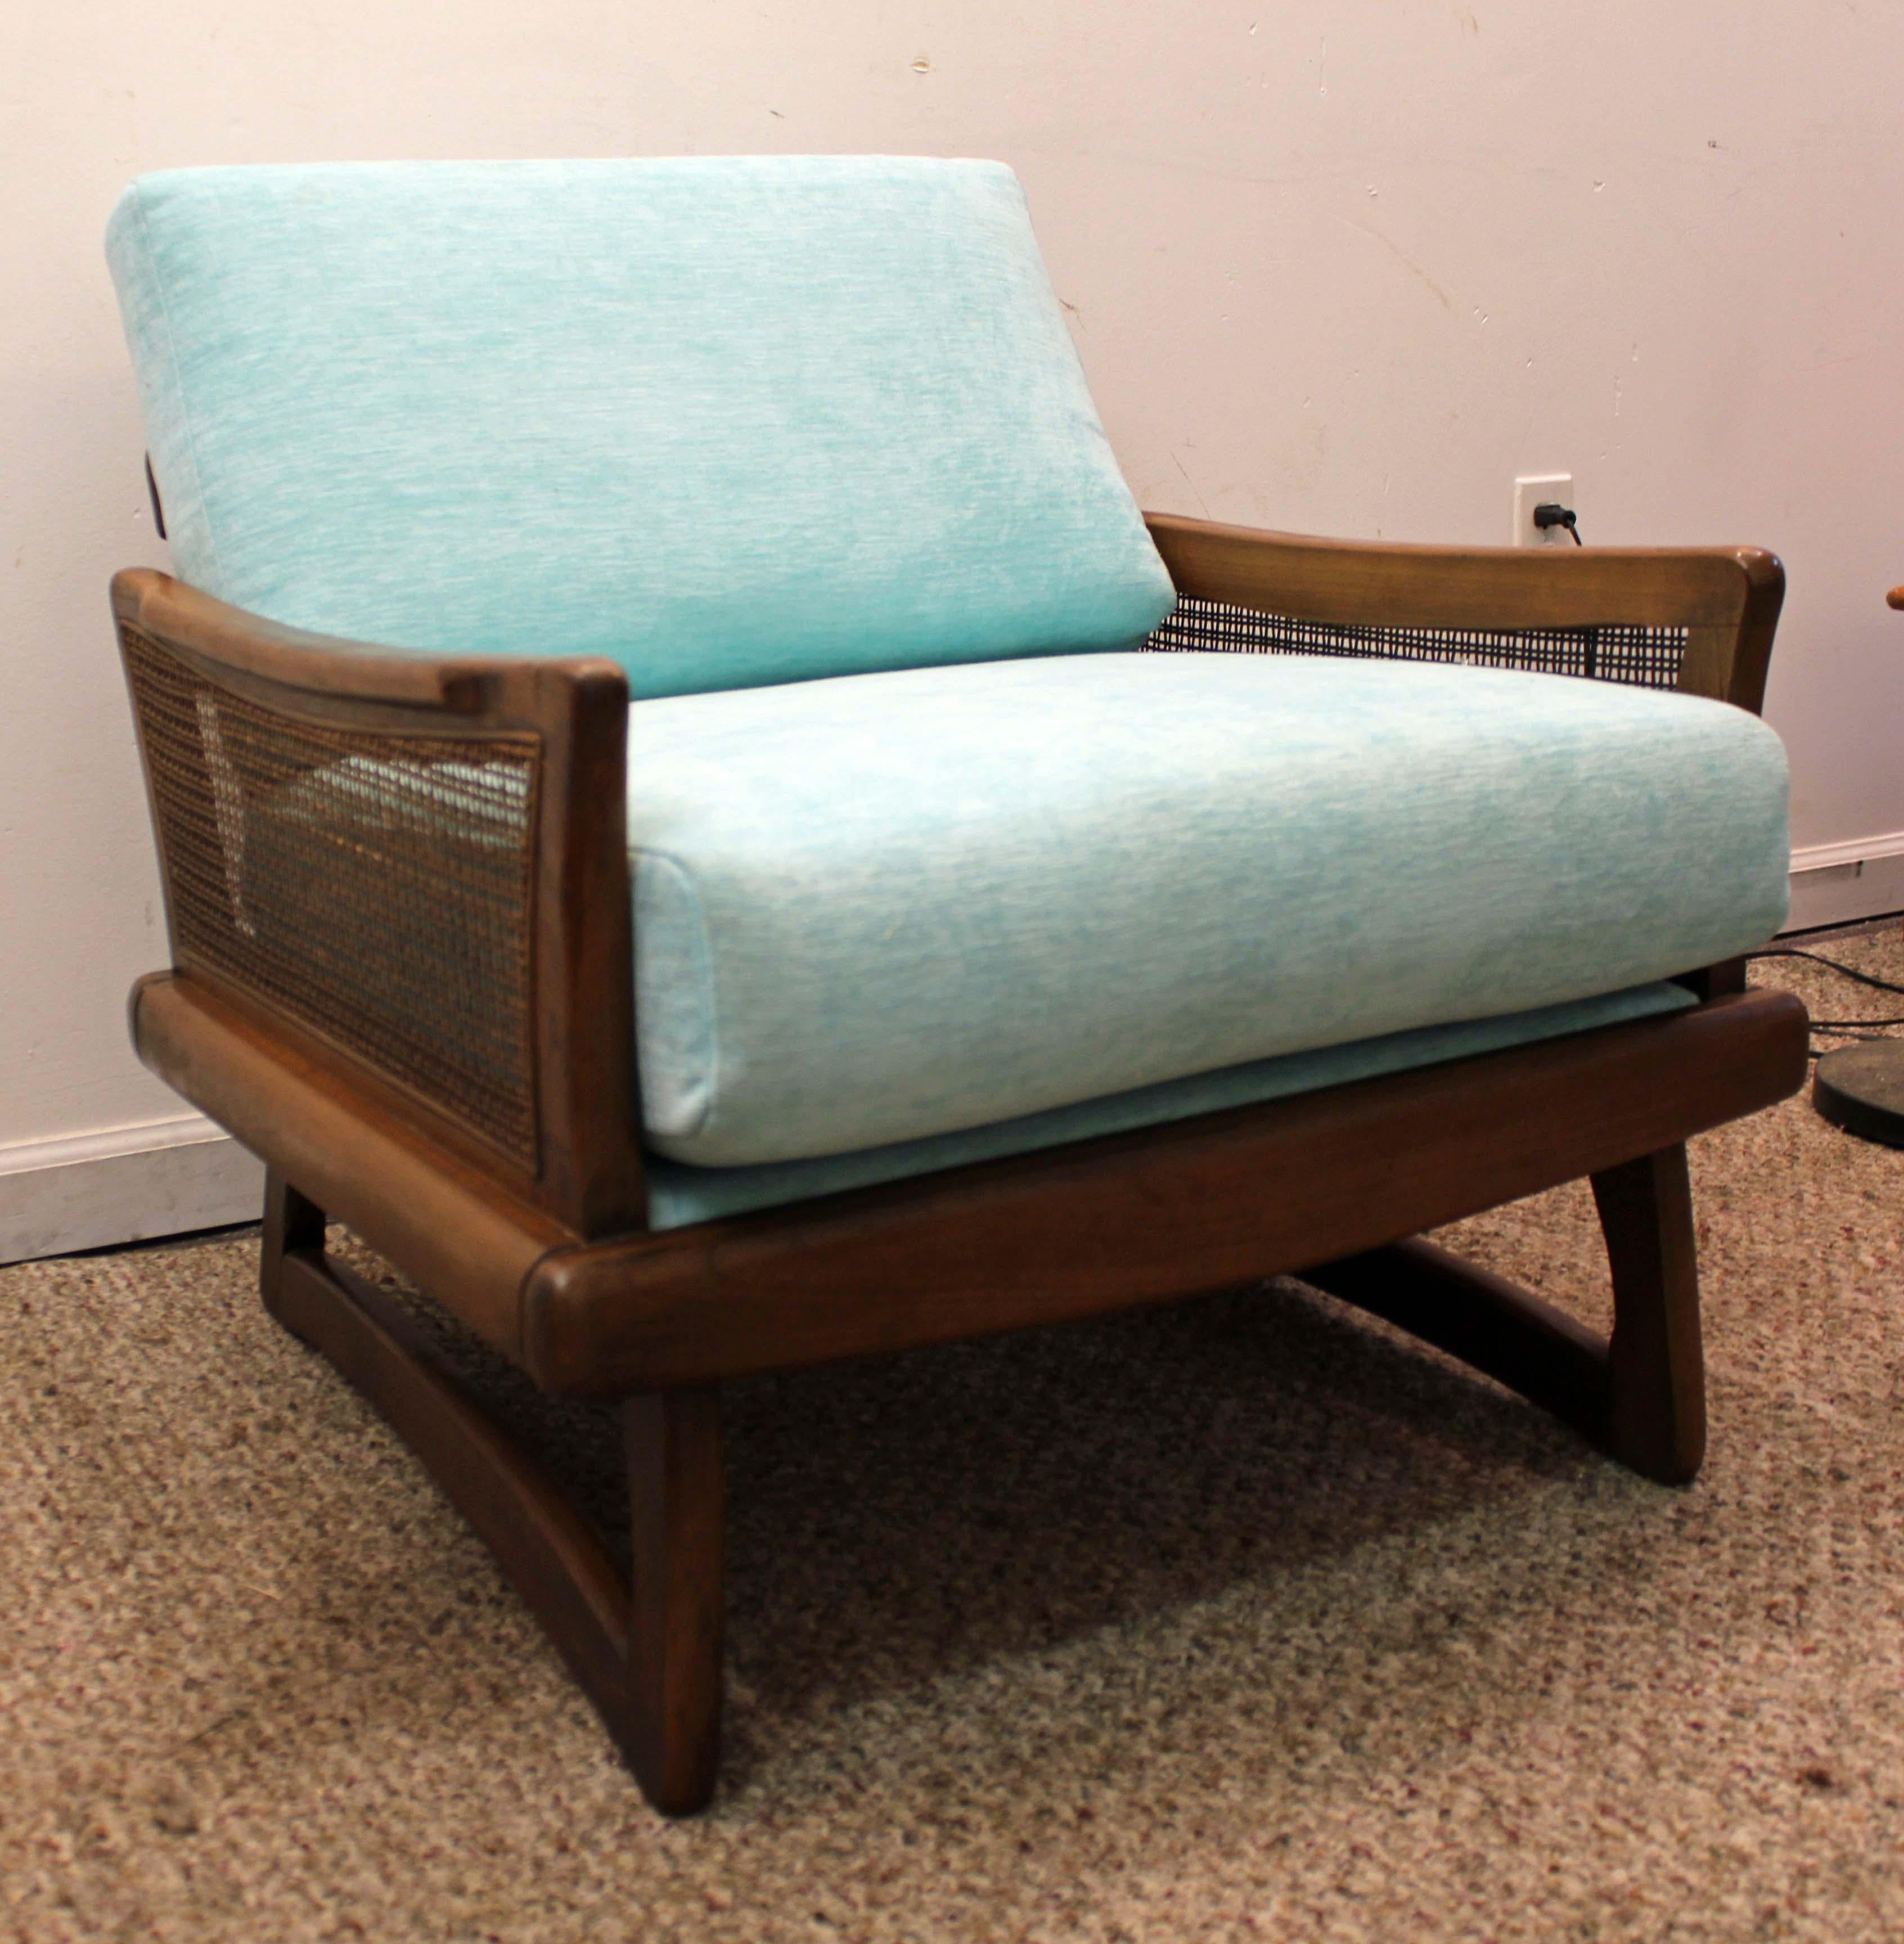 Offered is a beautifully reupholstered lounge chair. It is made of walnut with caned sides and boomerang legs. The chair is in excellent condition, showing minor wear (newly reupholstered, new cushions, small marks/scratches on wood, wear on cane